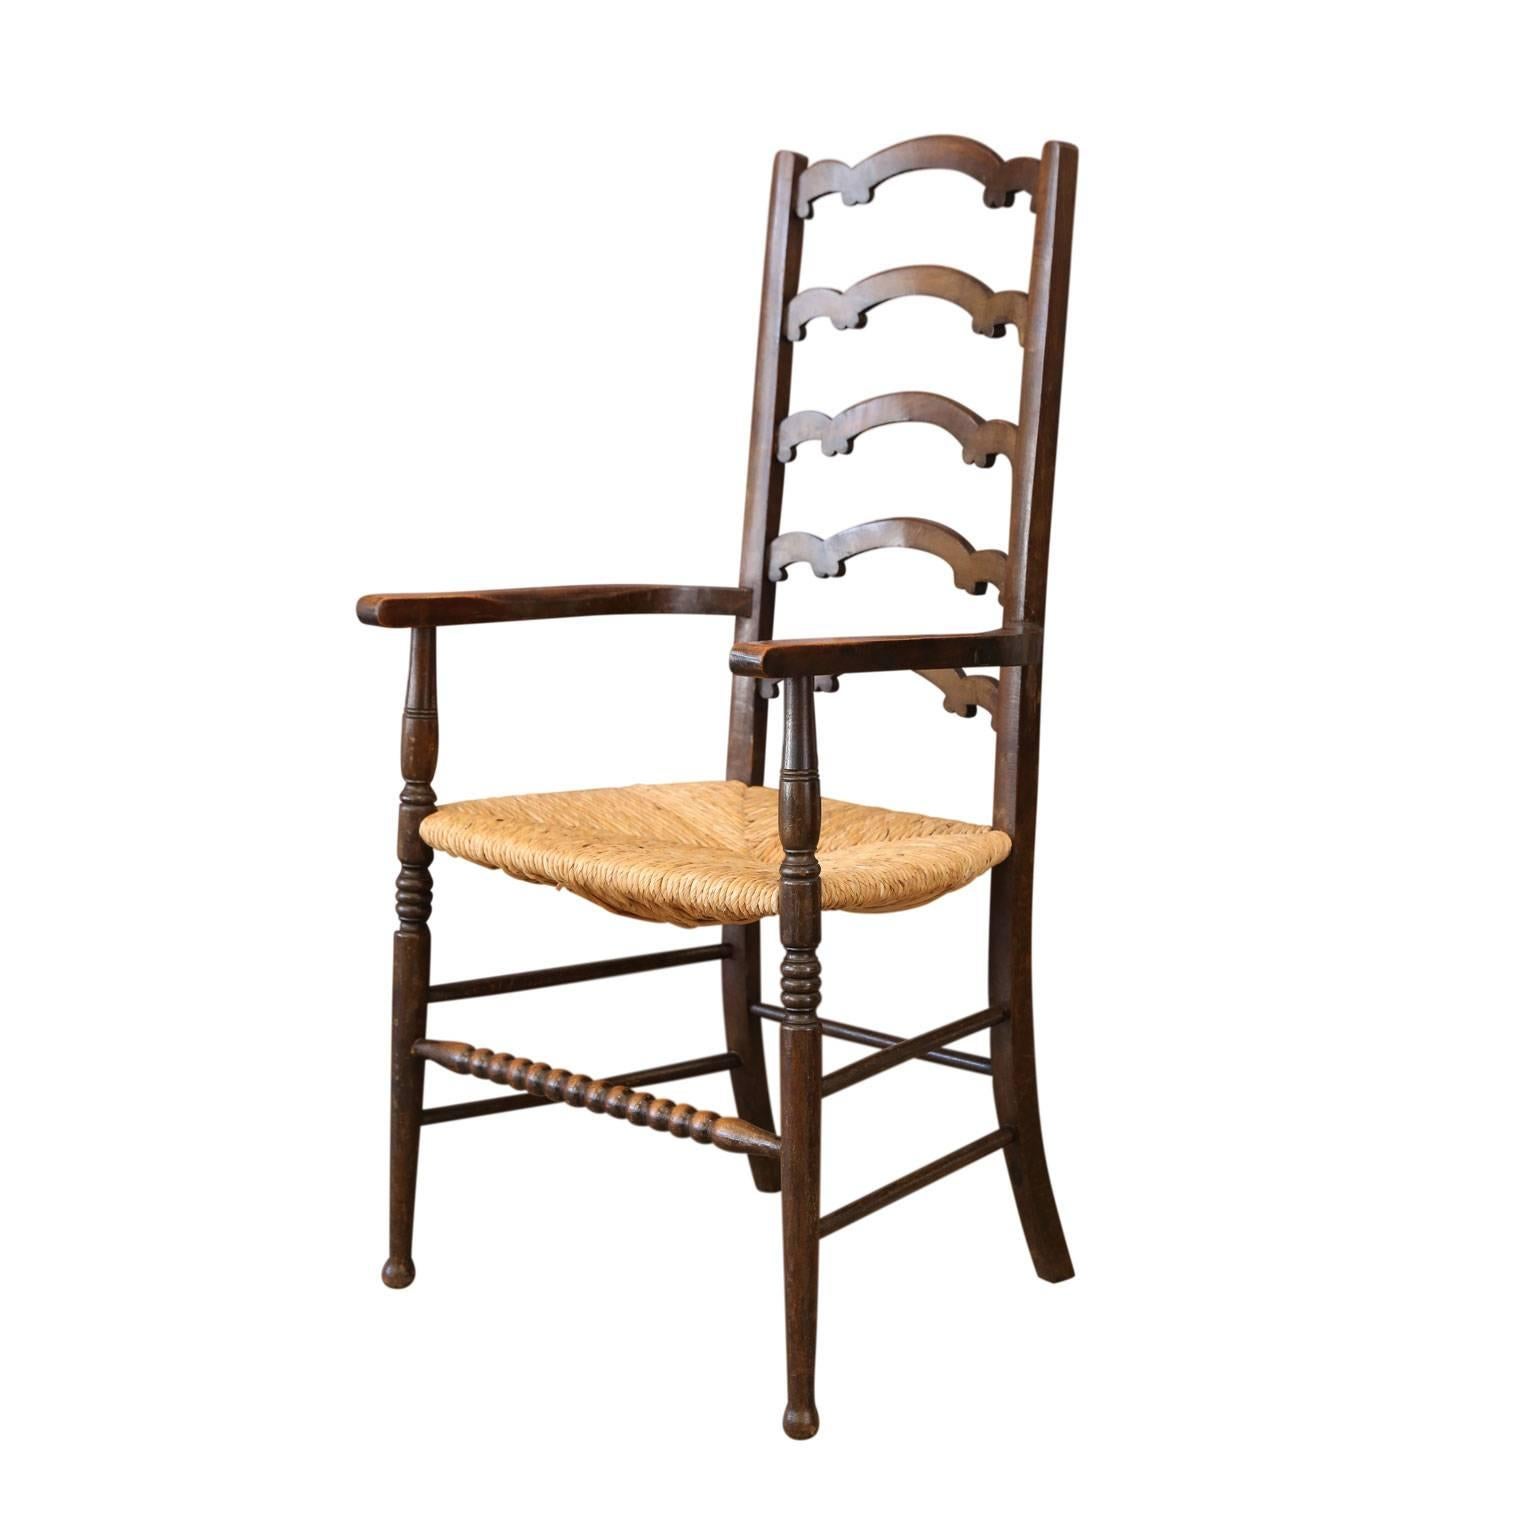 Unique ladder-back chairs carved with unusual, almost whimsical, scallop-shaped back splats, nice curved arms and a front turned bobbin stretcher. Chairs' nice dark finish is naturally worn in all the right, and expected, places (front stretcher,